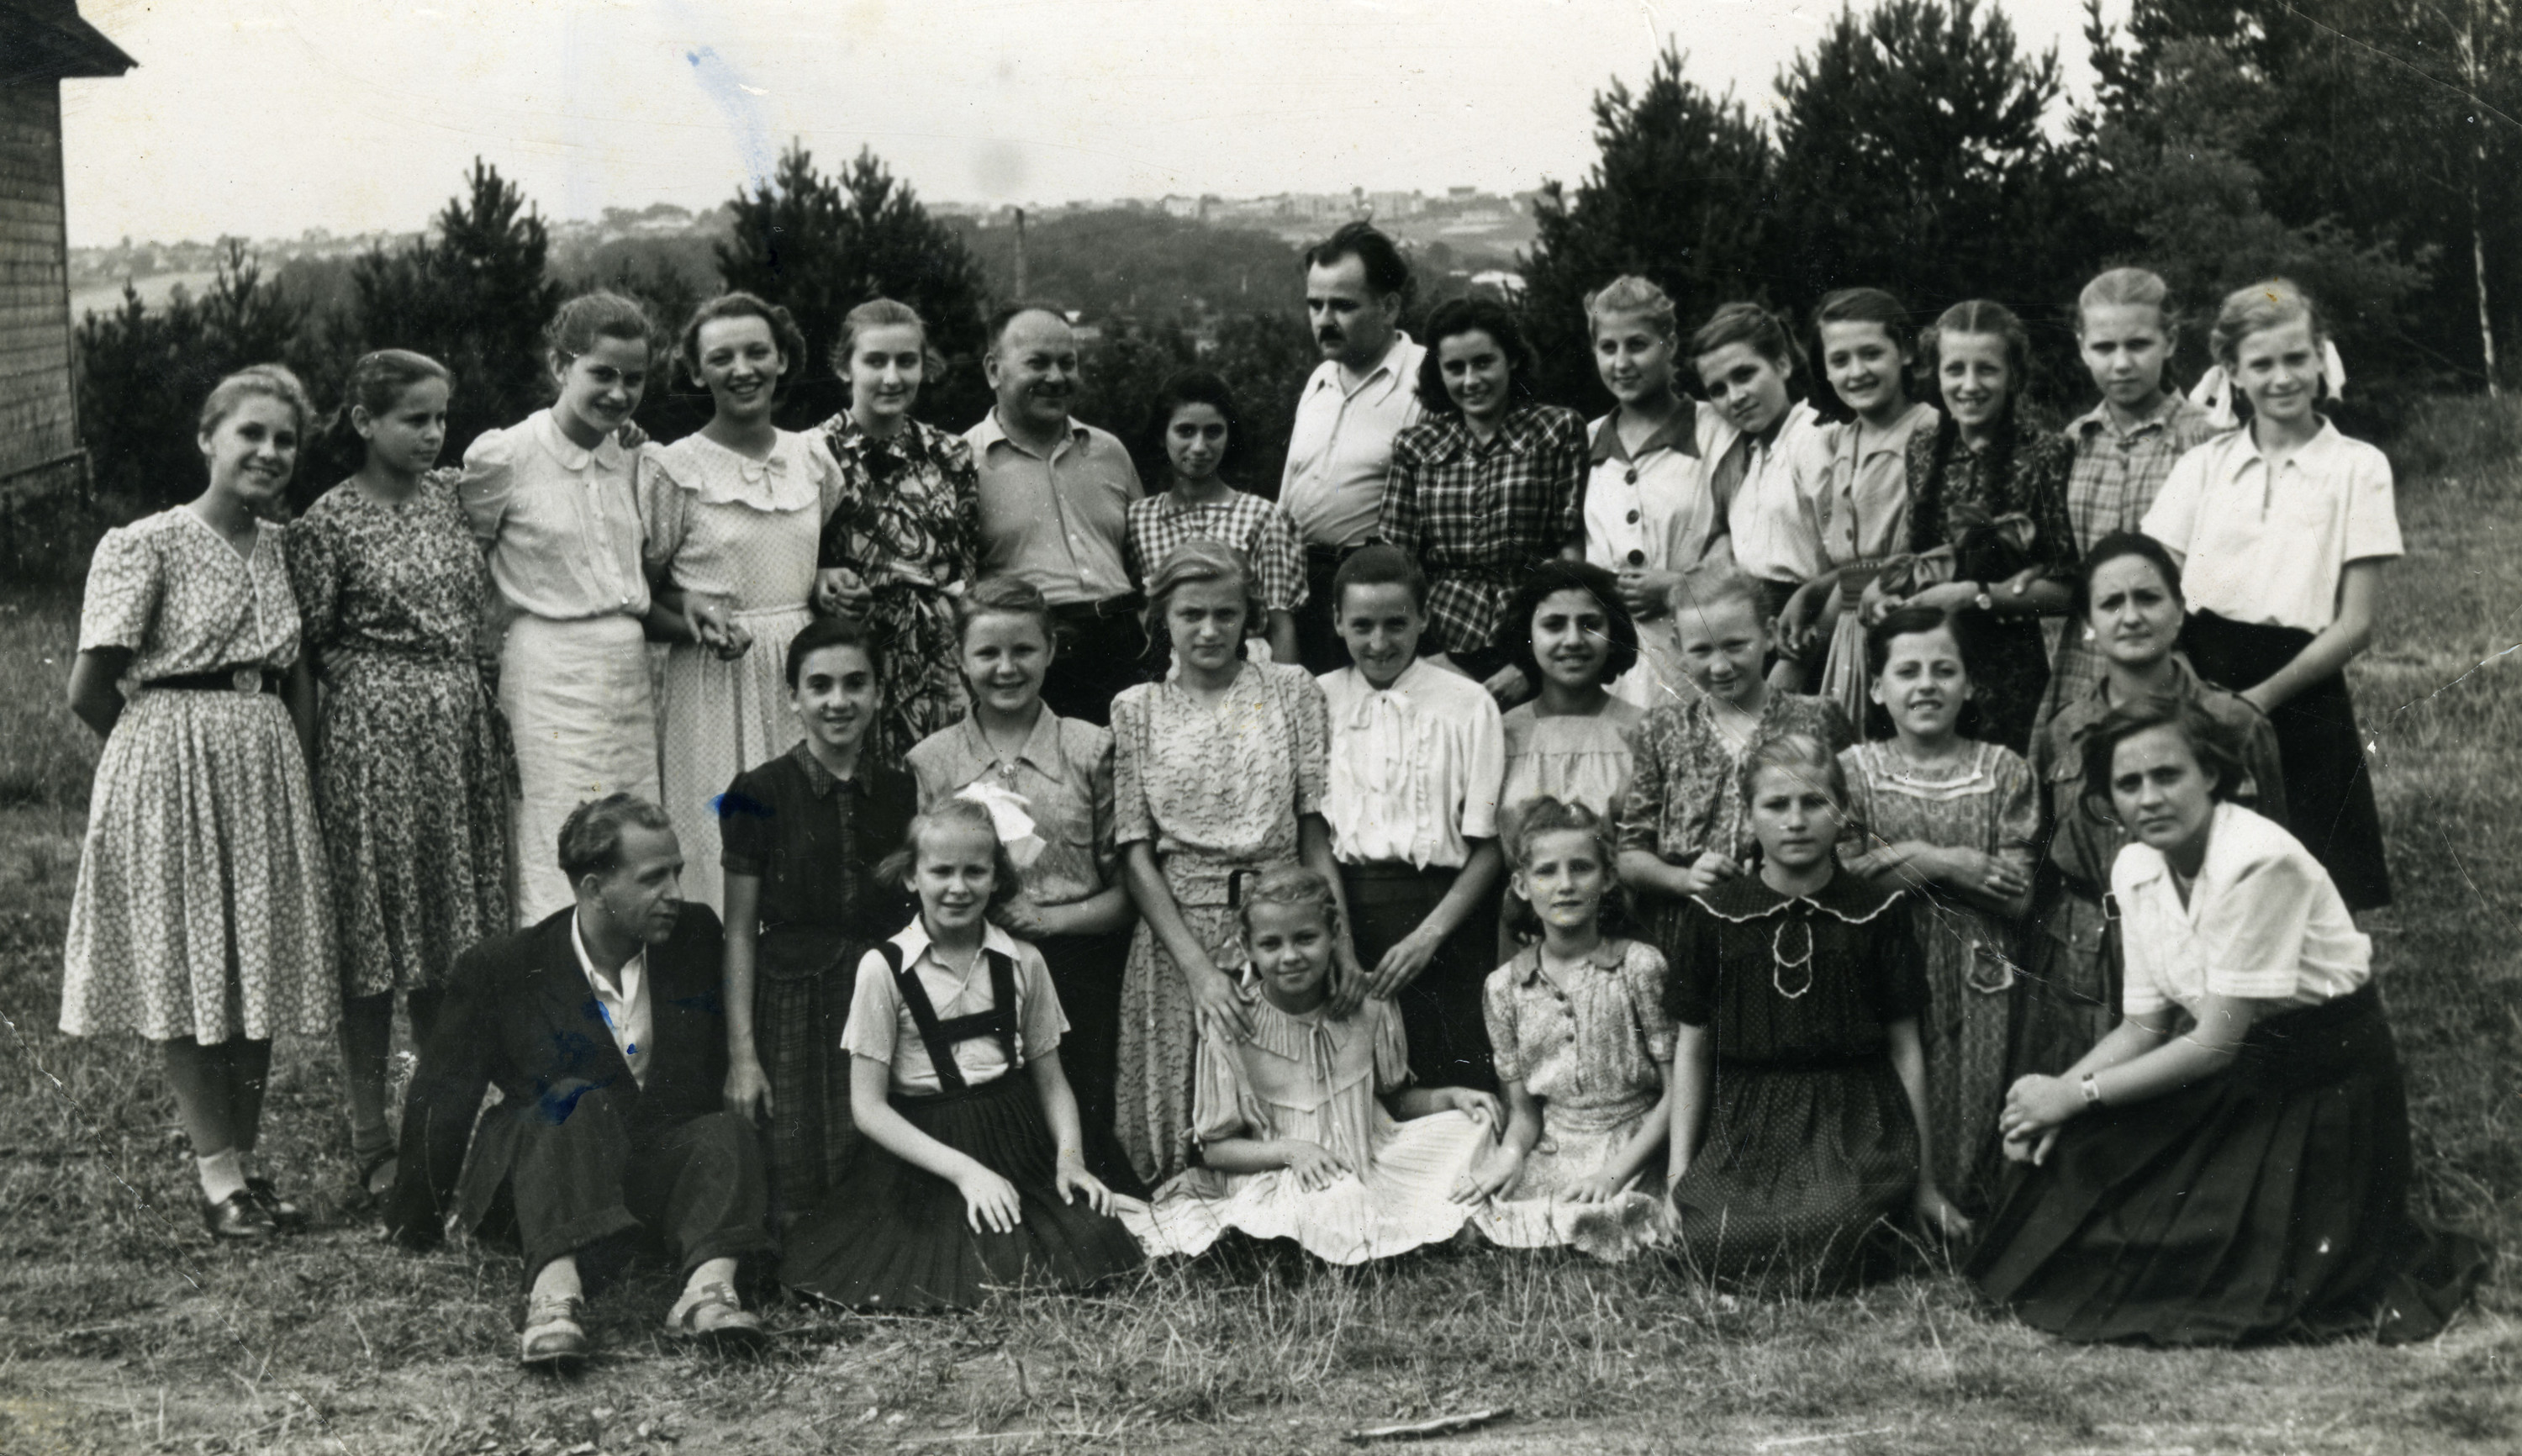 Children living in an orphanage in Warsaw, on vacation after the war.

Among those pictured is Leah Altman (kneeling in middle row, far left).